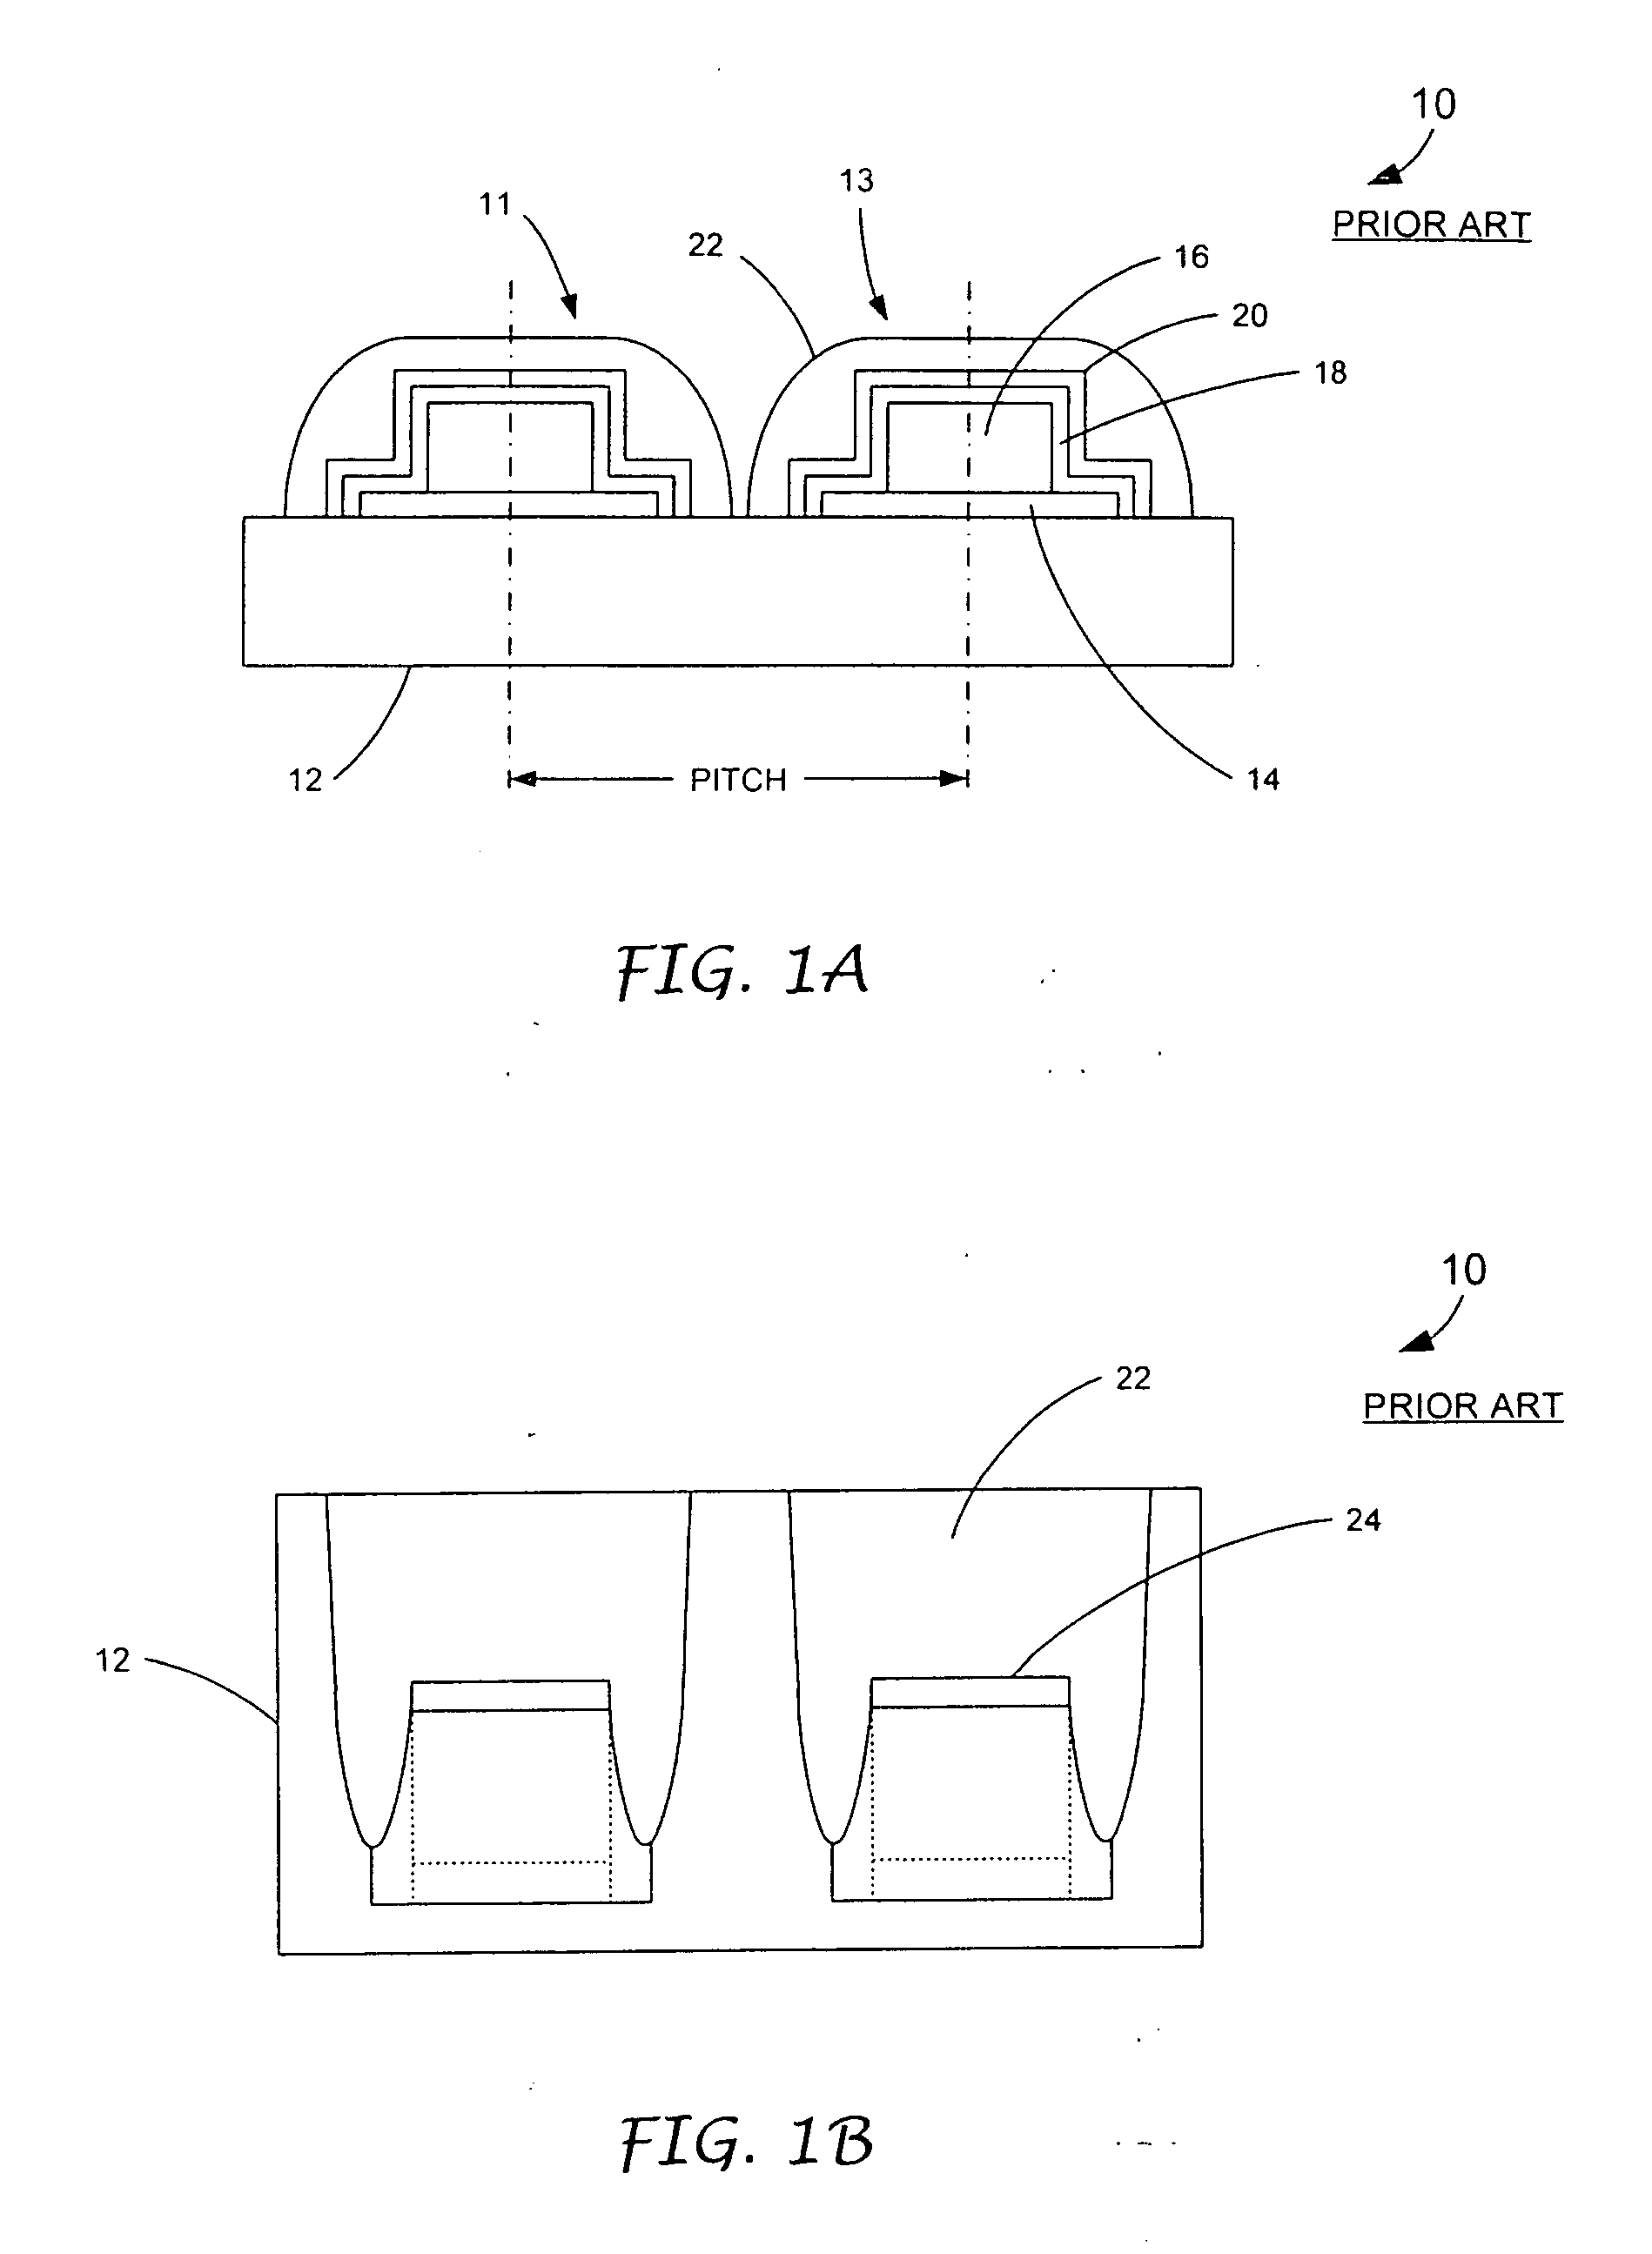 Technique for defining a wettable solder joint area for an electronic assembly substrate